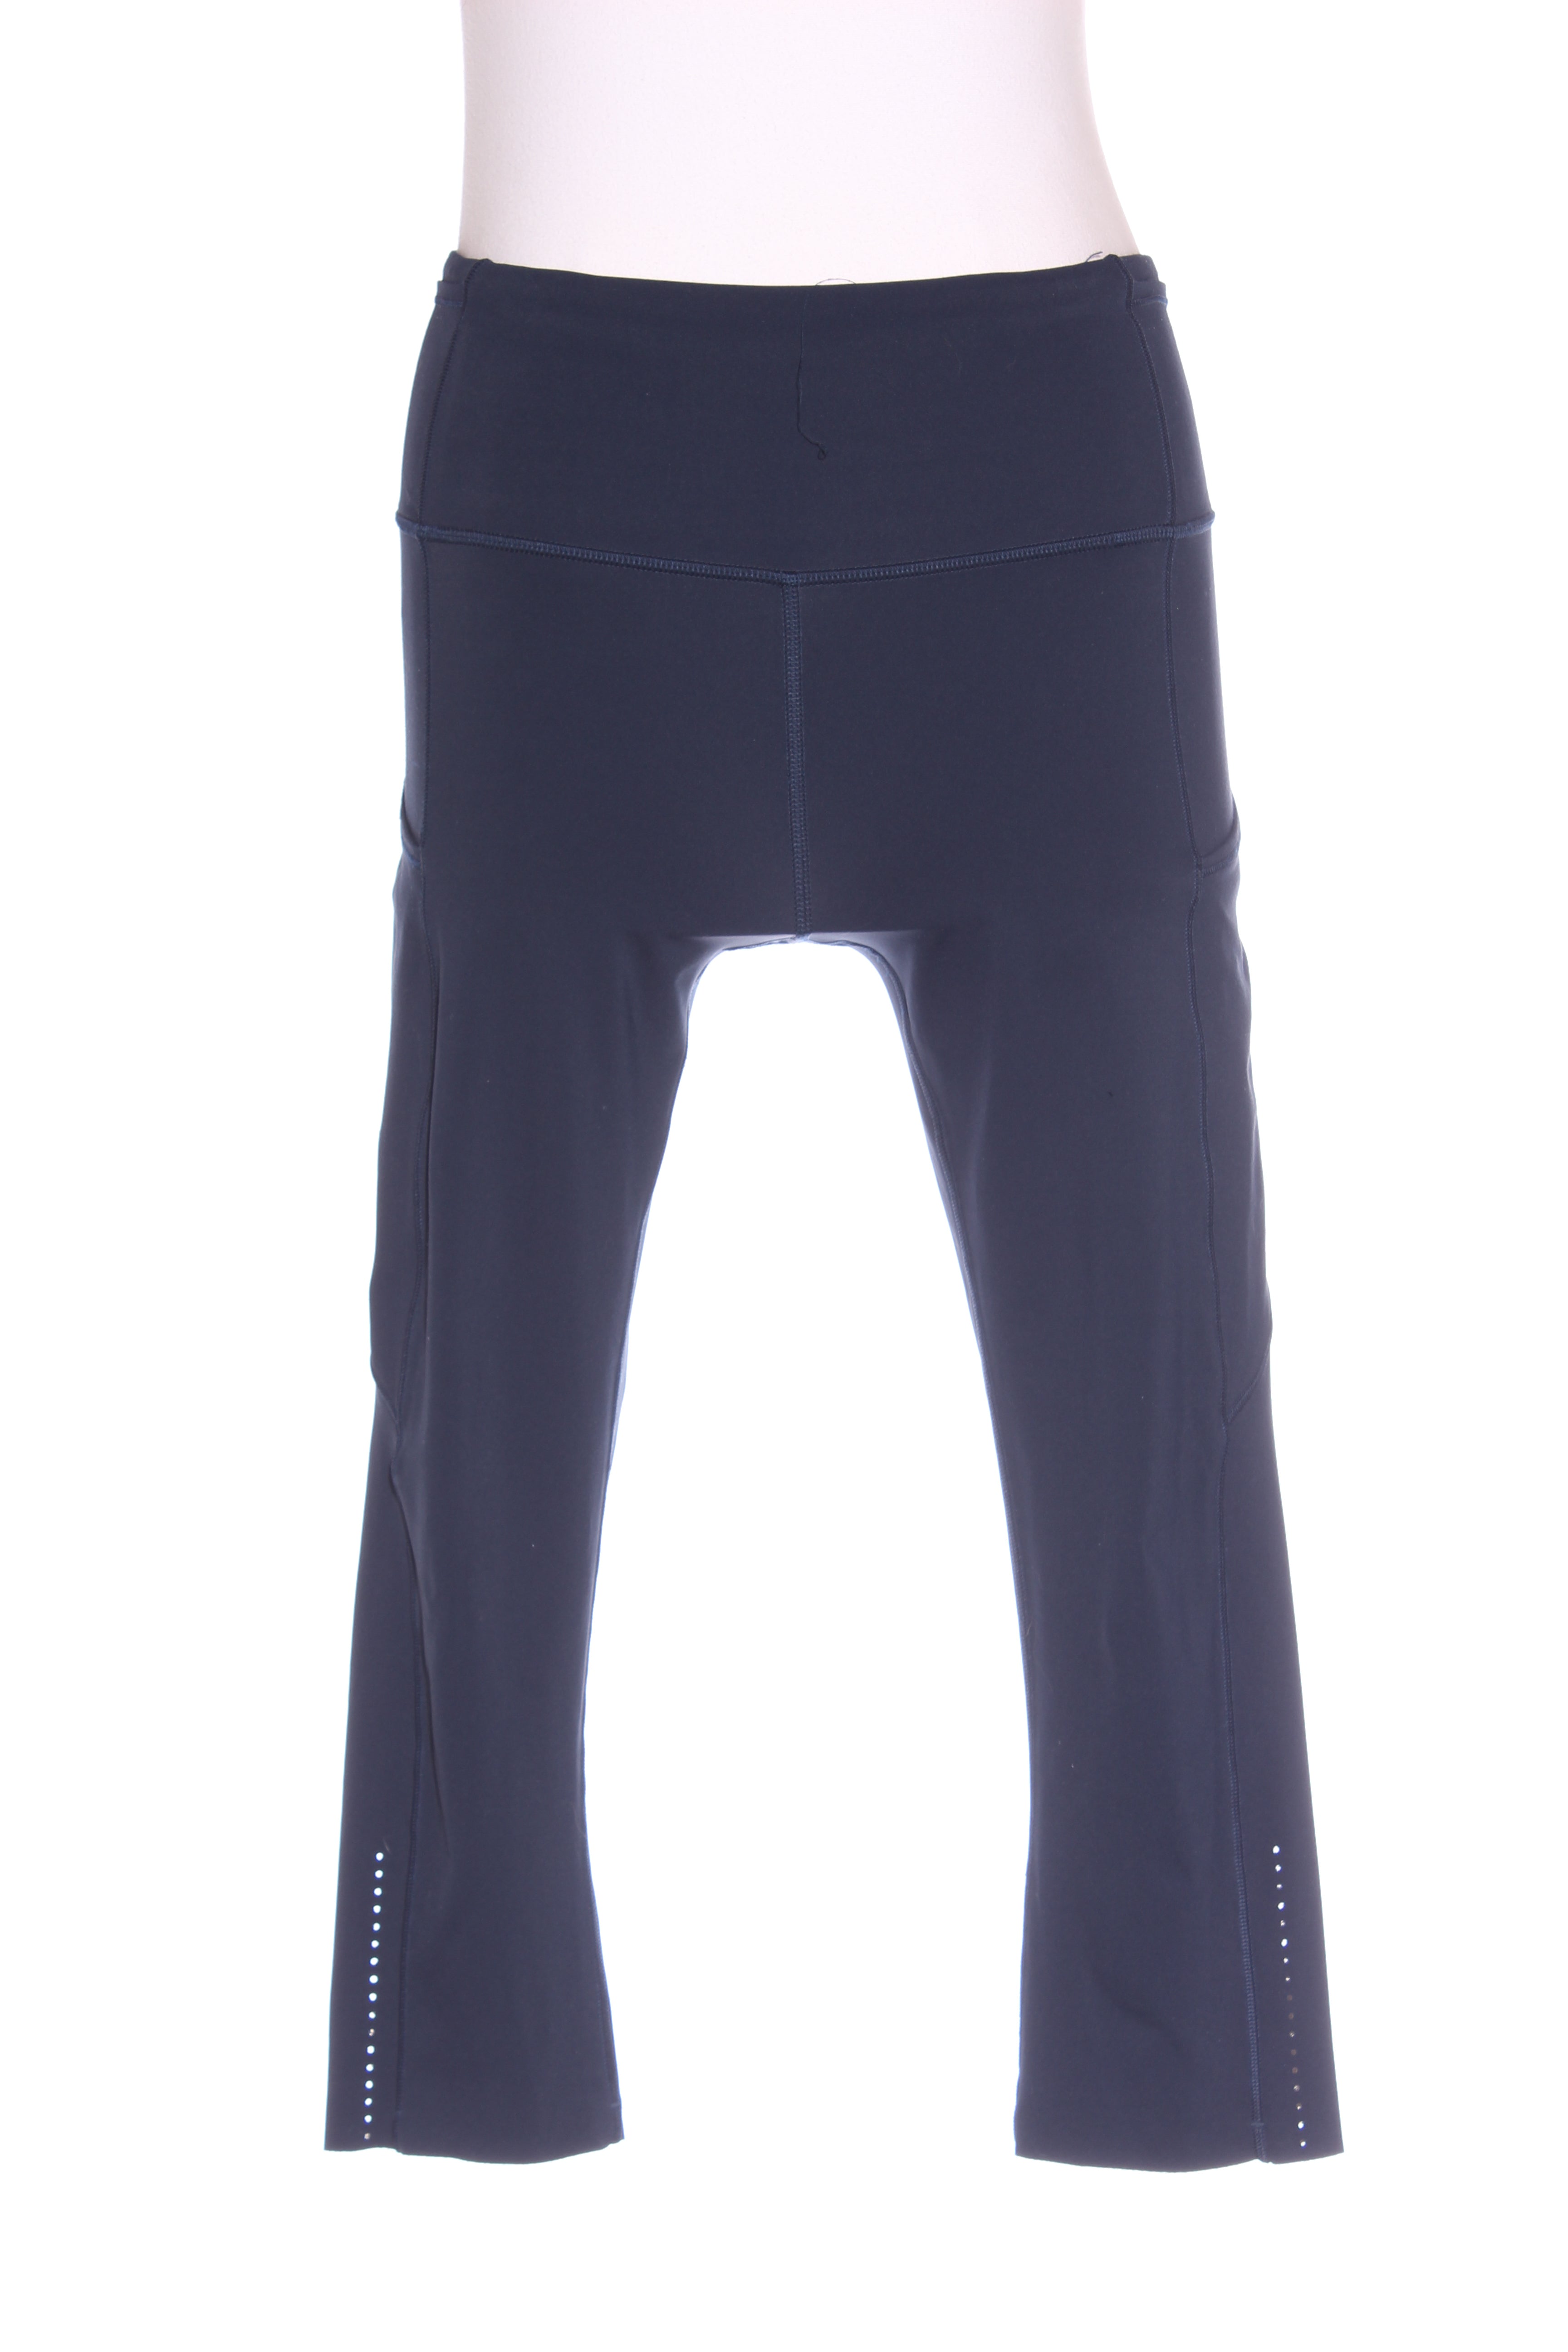 LULULEMON - Navy 3/4 tights! 10, Recycle Style